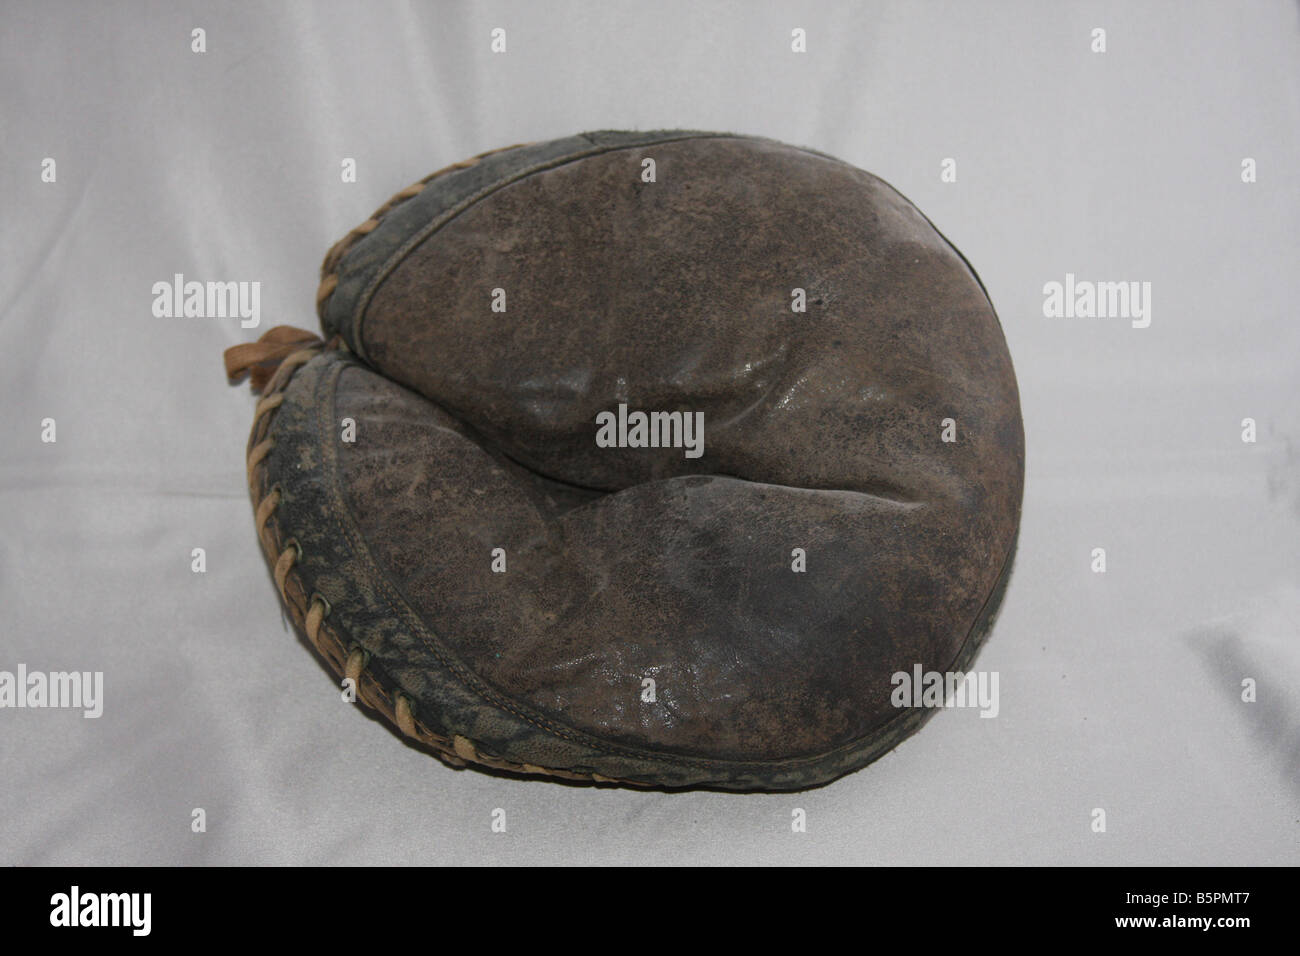 Old catcher's mitt that would be a treasure for any sports memorabilia collector. Stock Photo